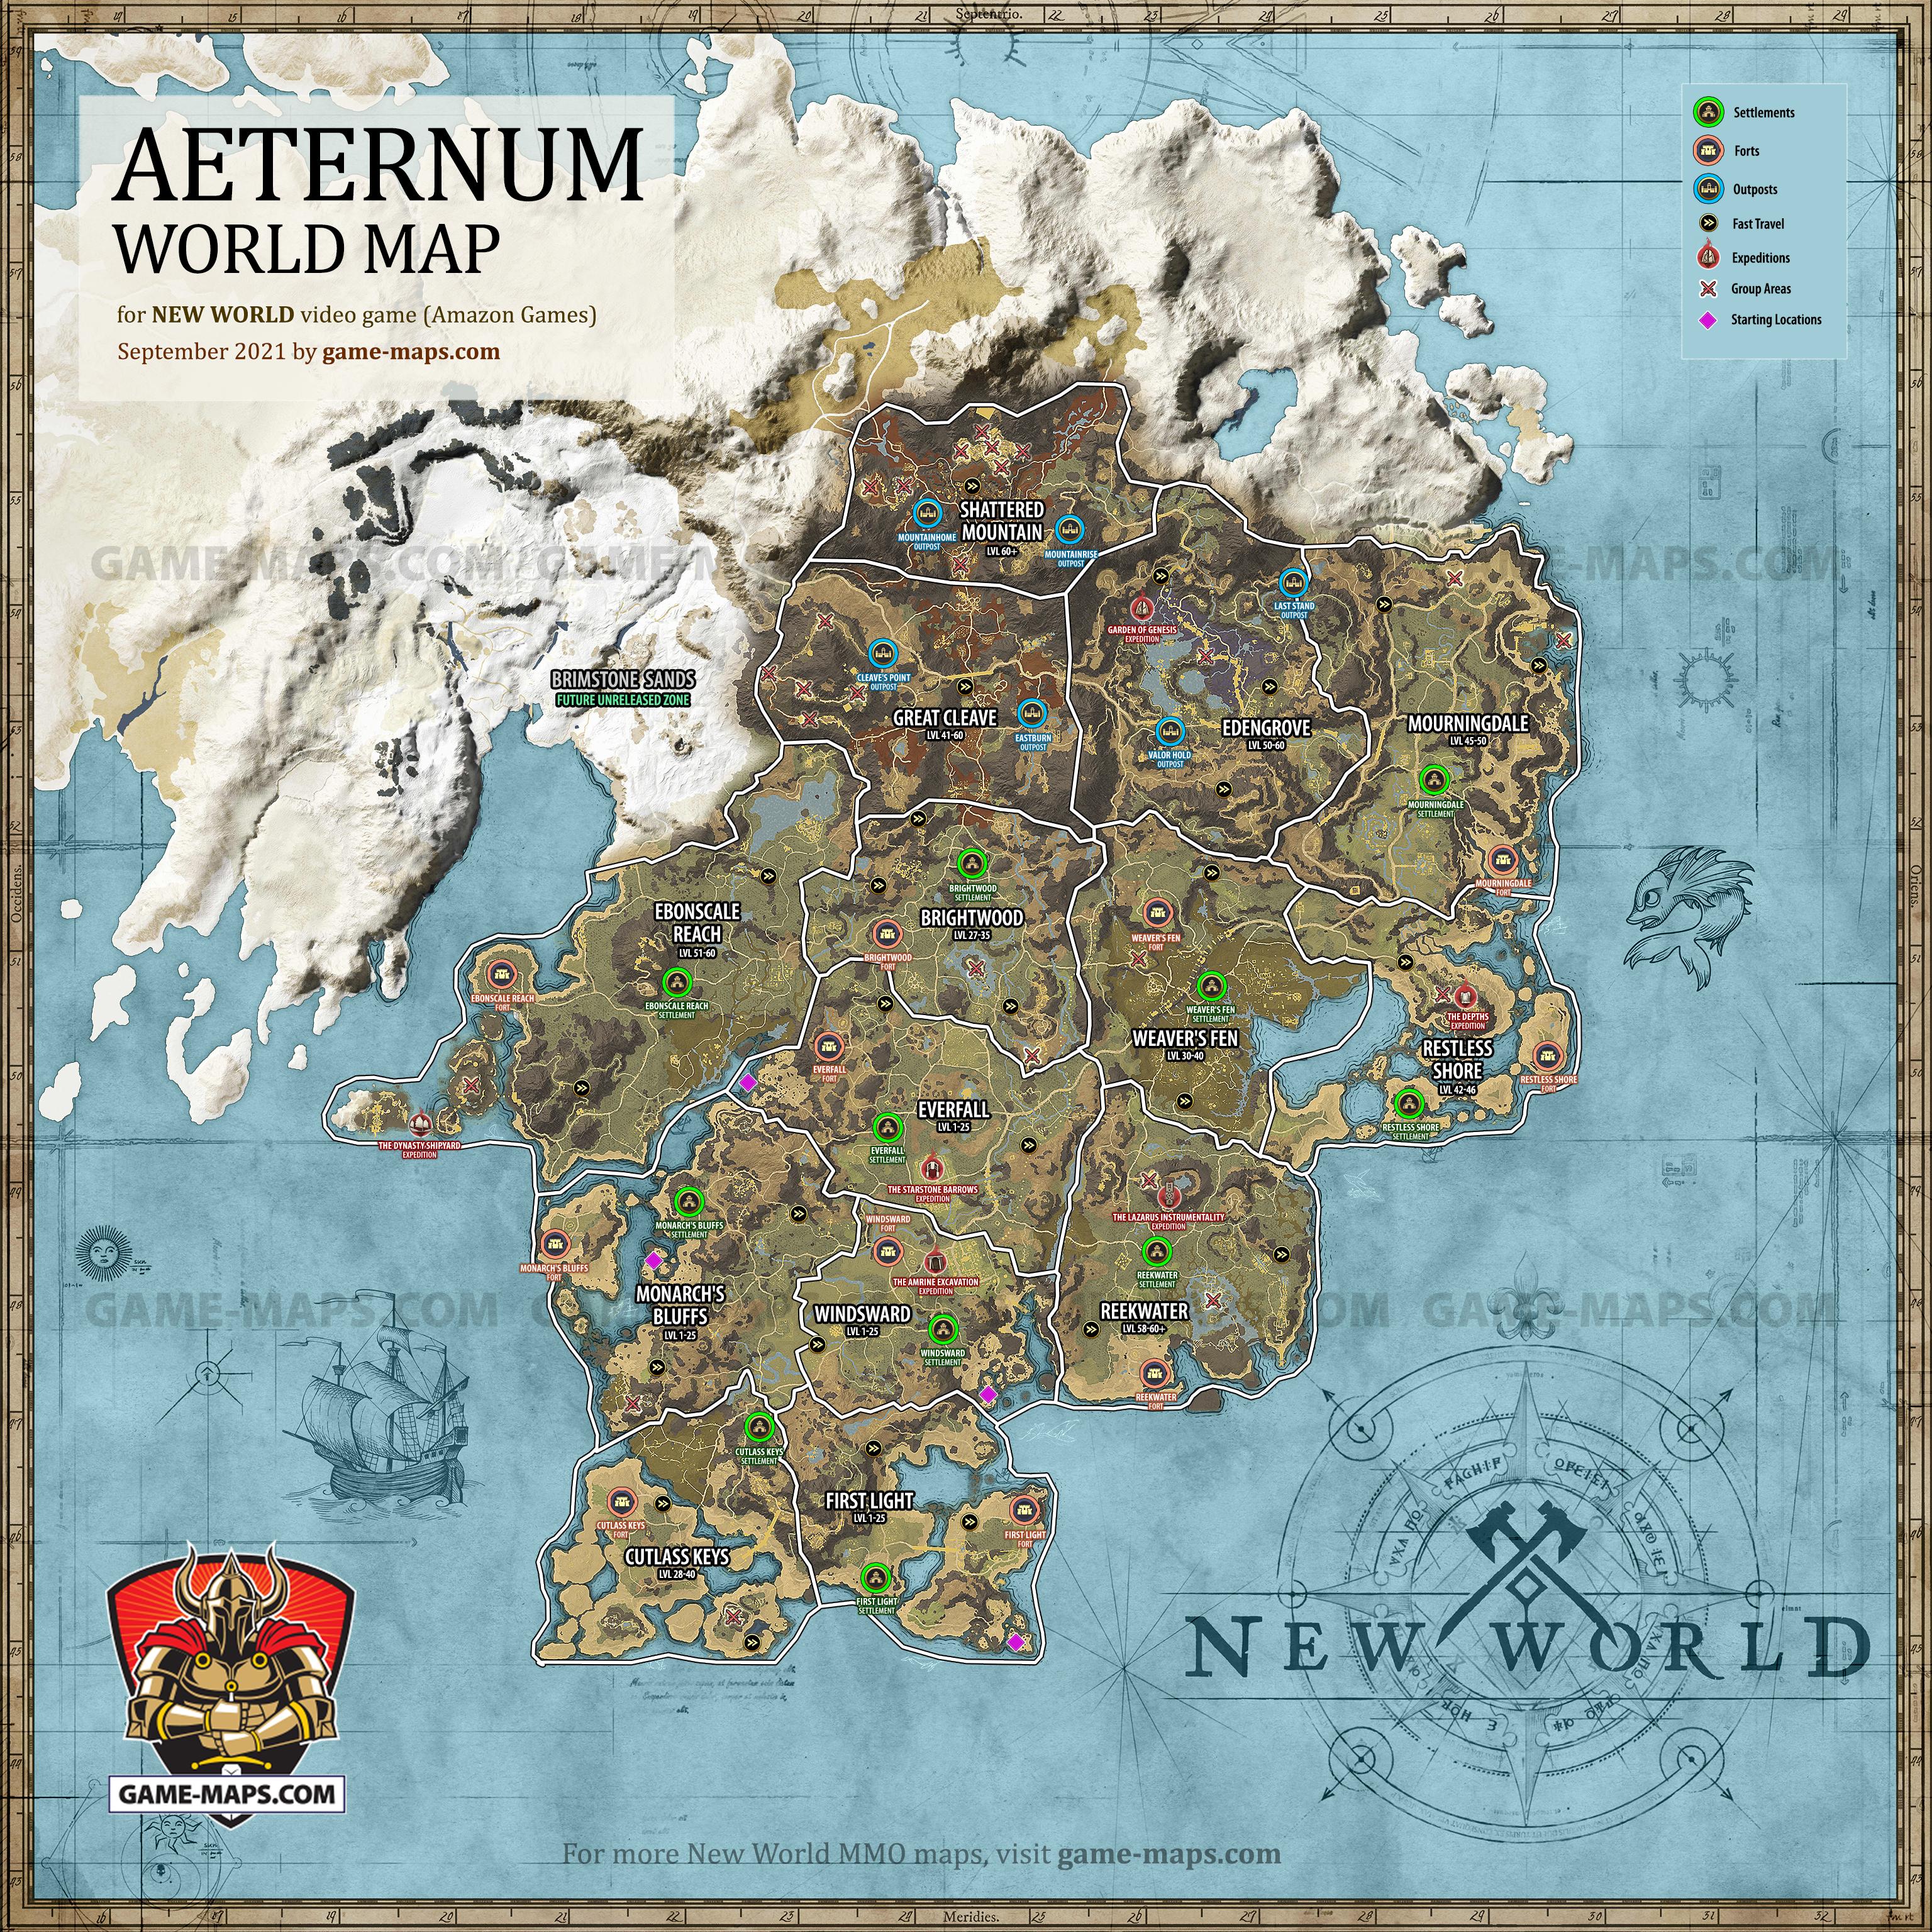 World Map for New World MMO - Aeternum